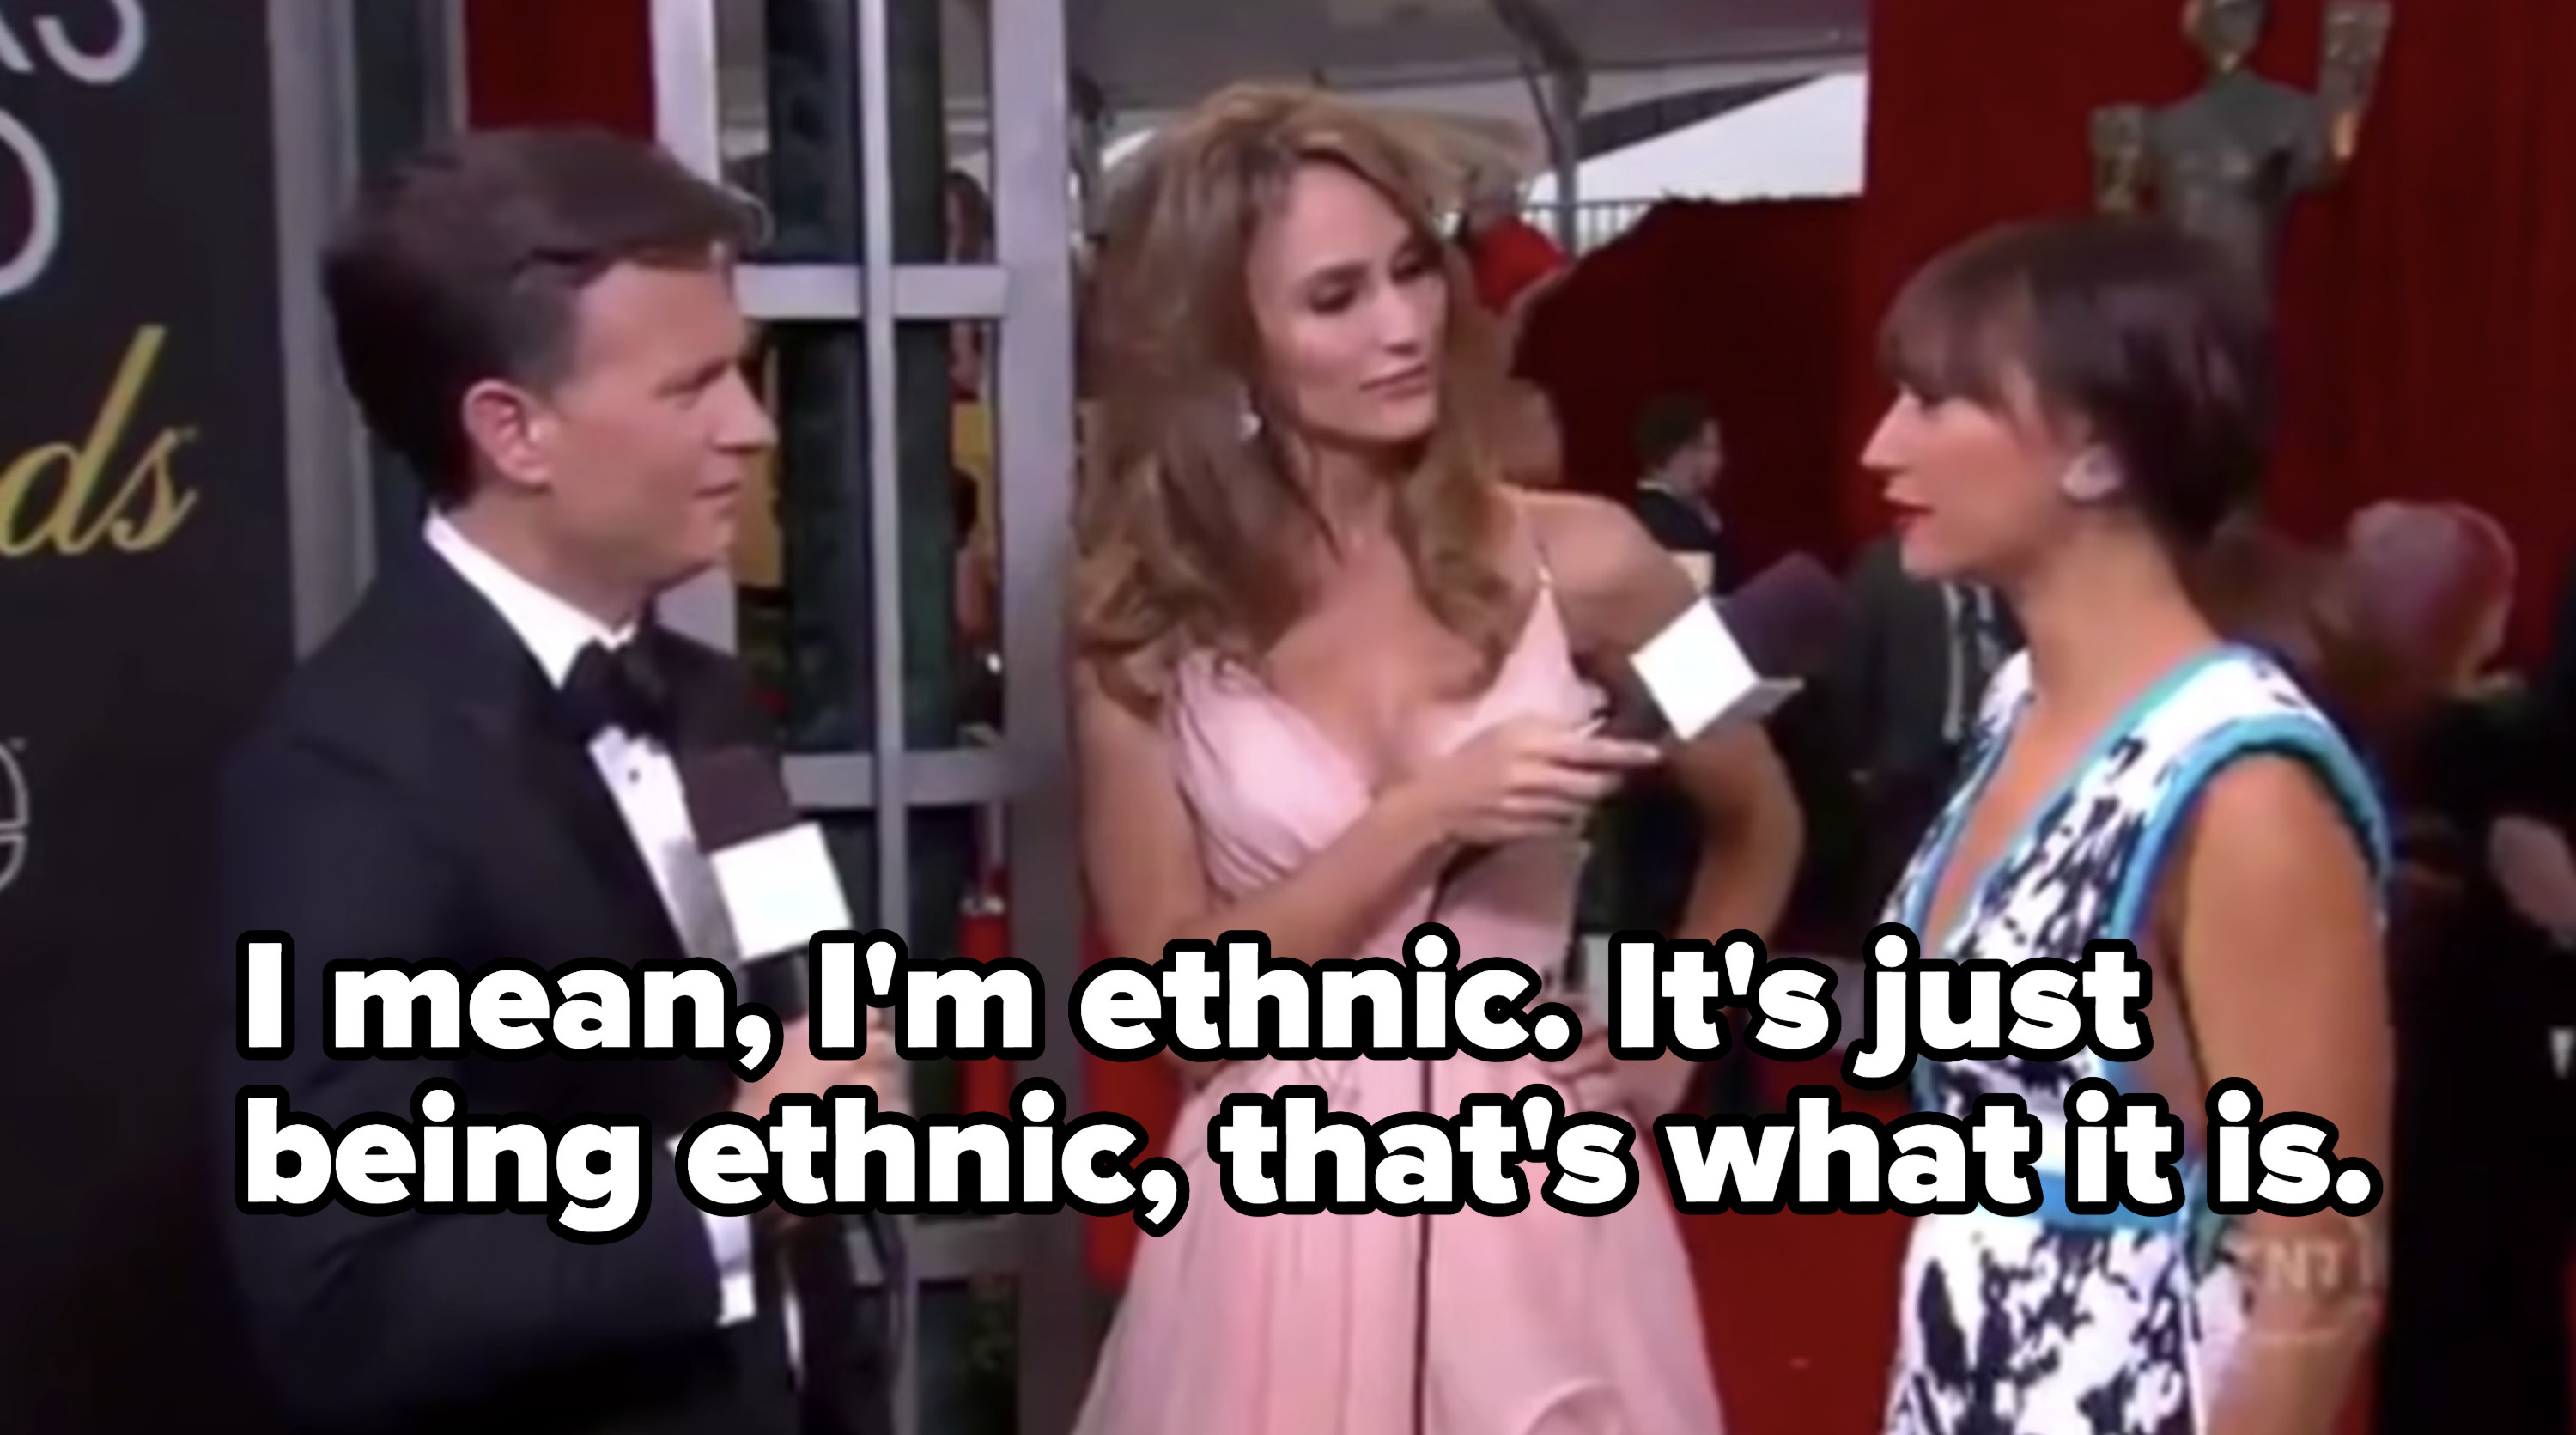 Rashida said &quot;I mean, I&#x27;m ethnic. It&#x27;s just what being ethnic, that&#x27;s what it is&quot;